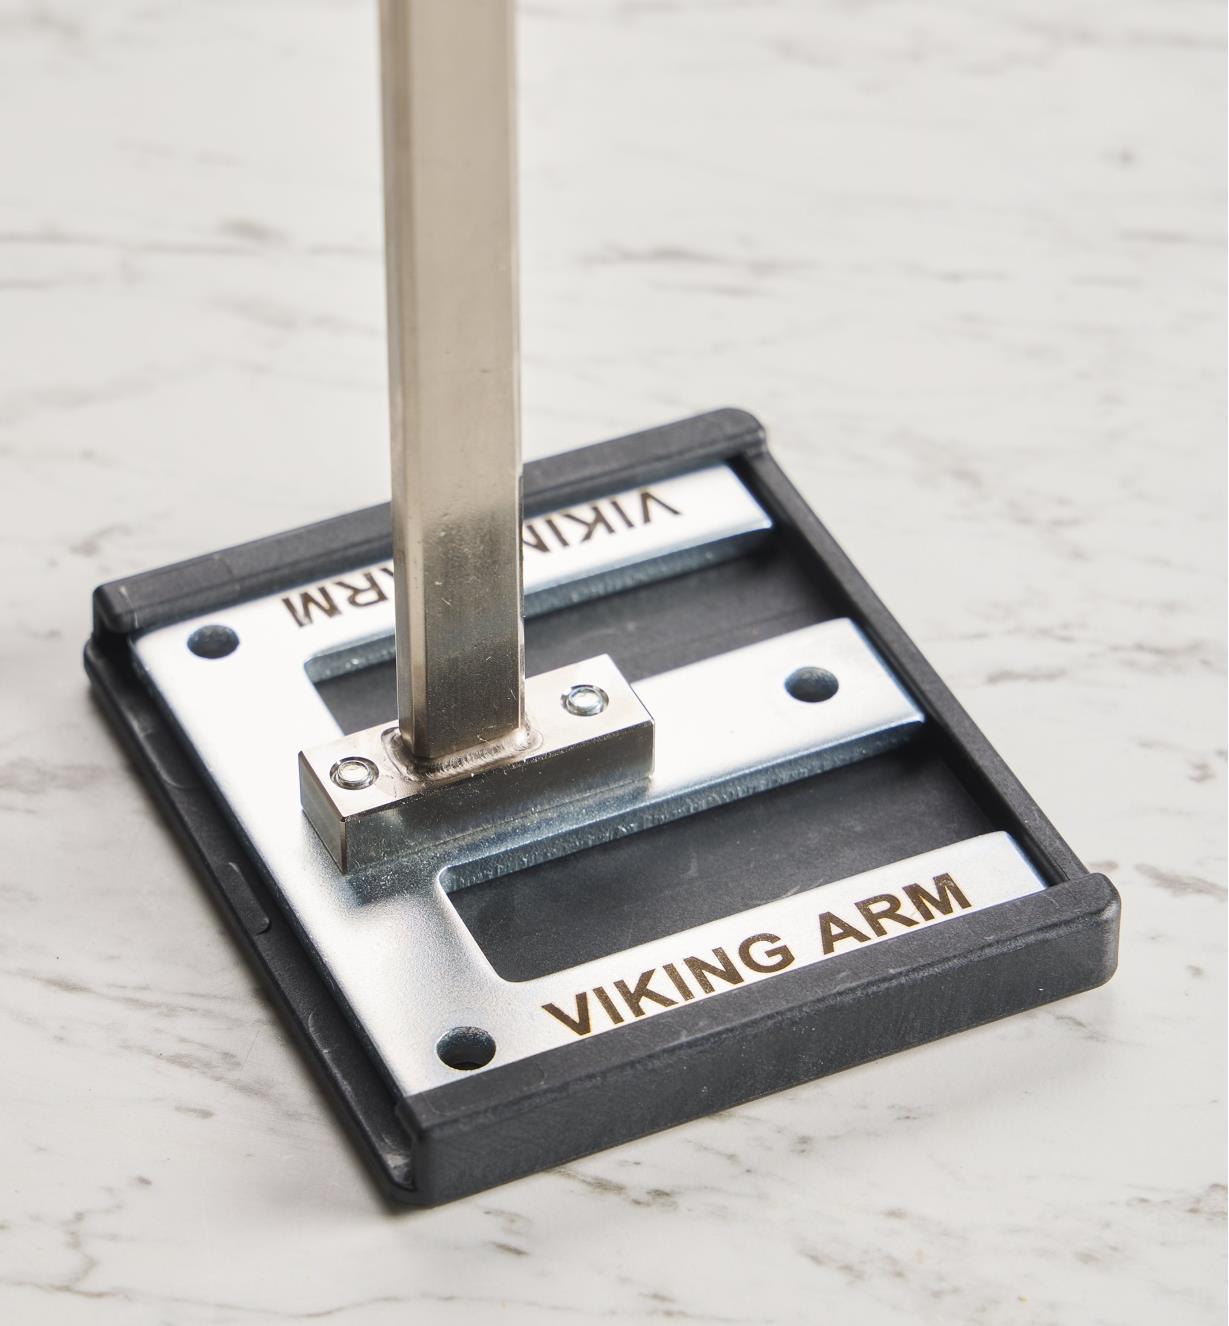 A top view of a base plate of a Viking Arm assembly jack with a base plate pad installed